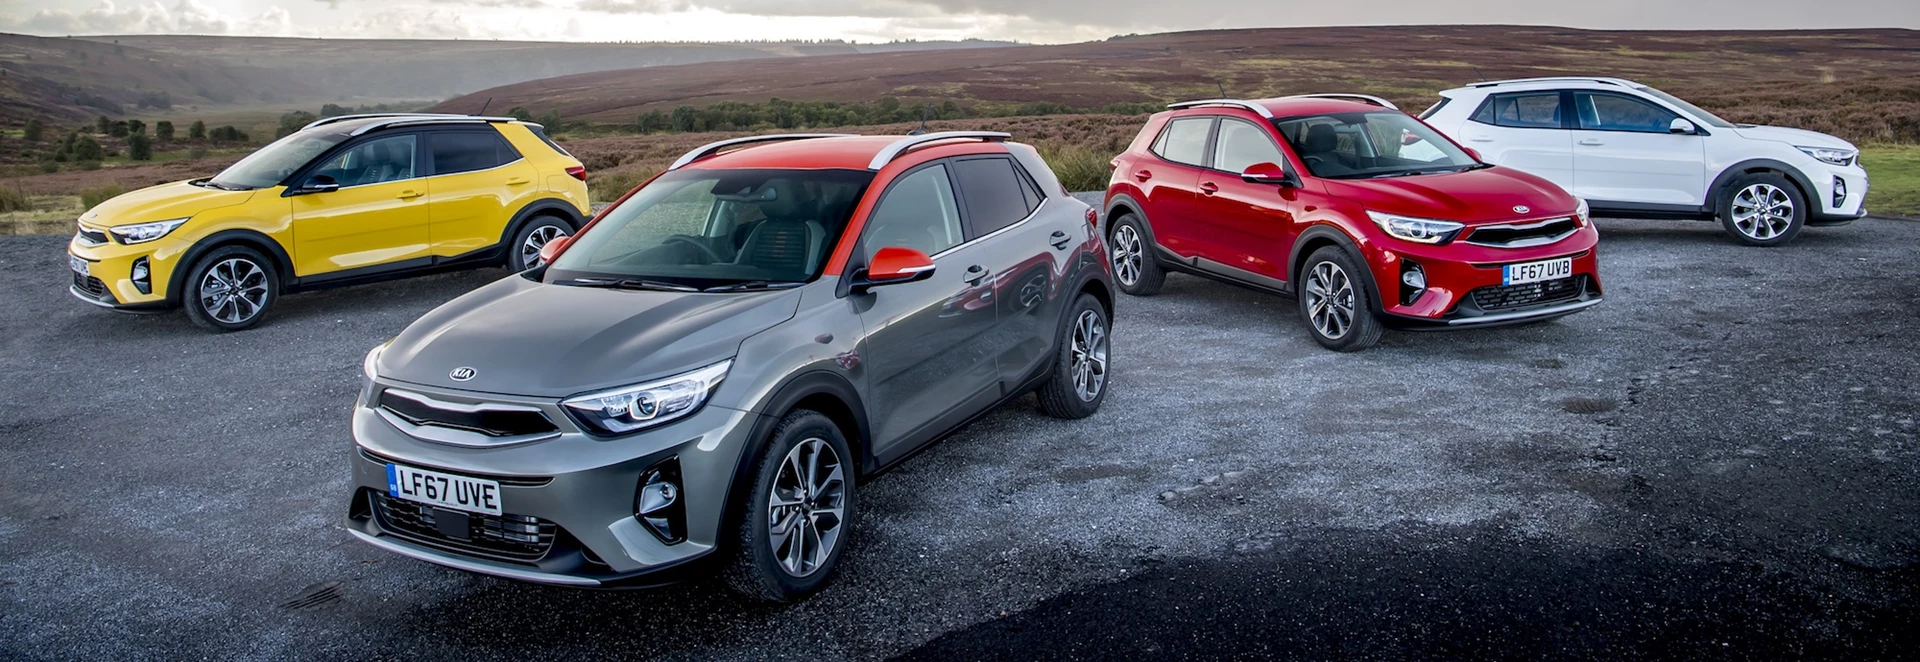 Kia launches Stonic crossover for UK market 